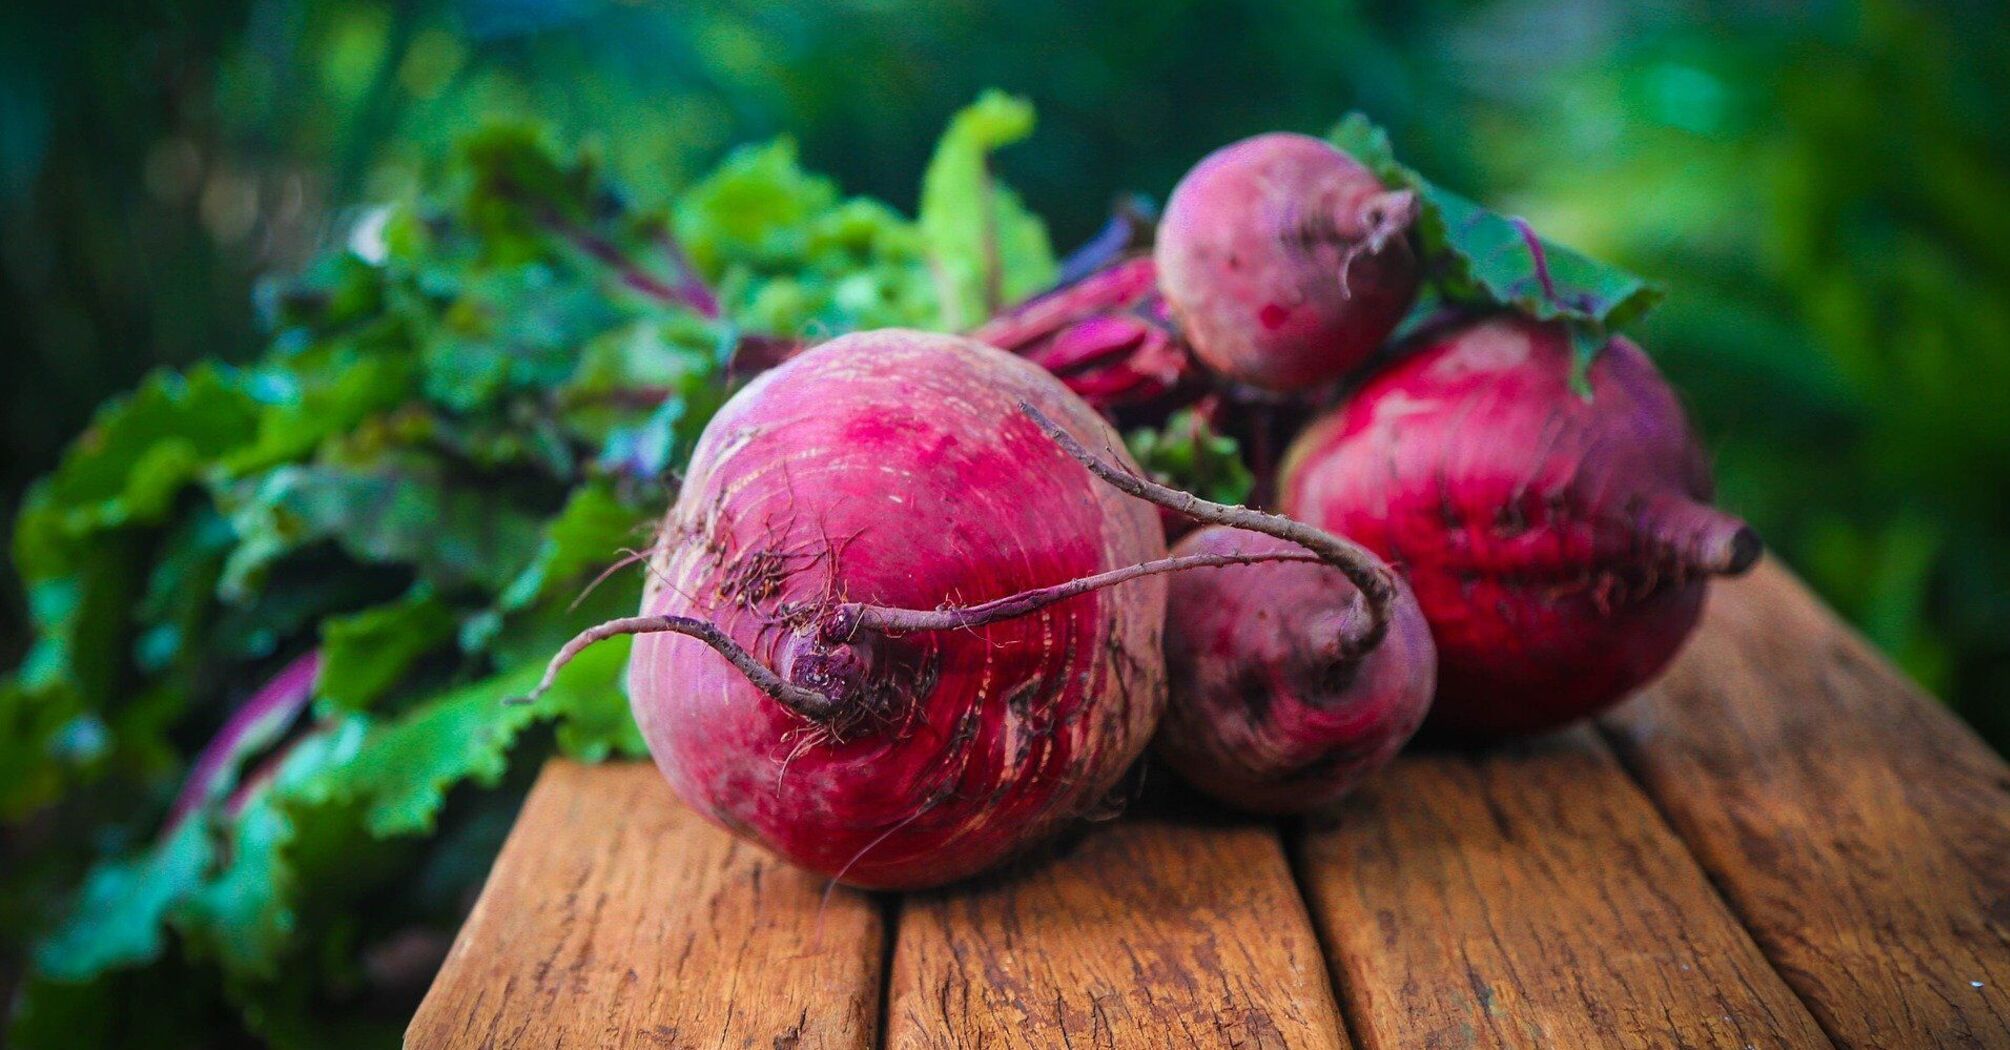 Beetroot for dishes